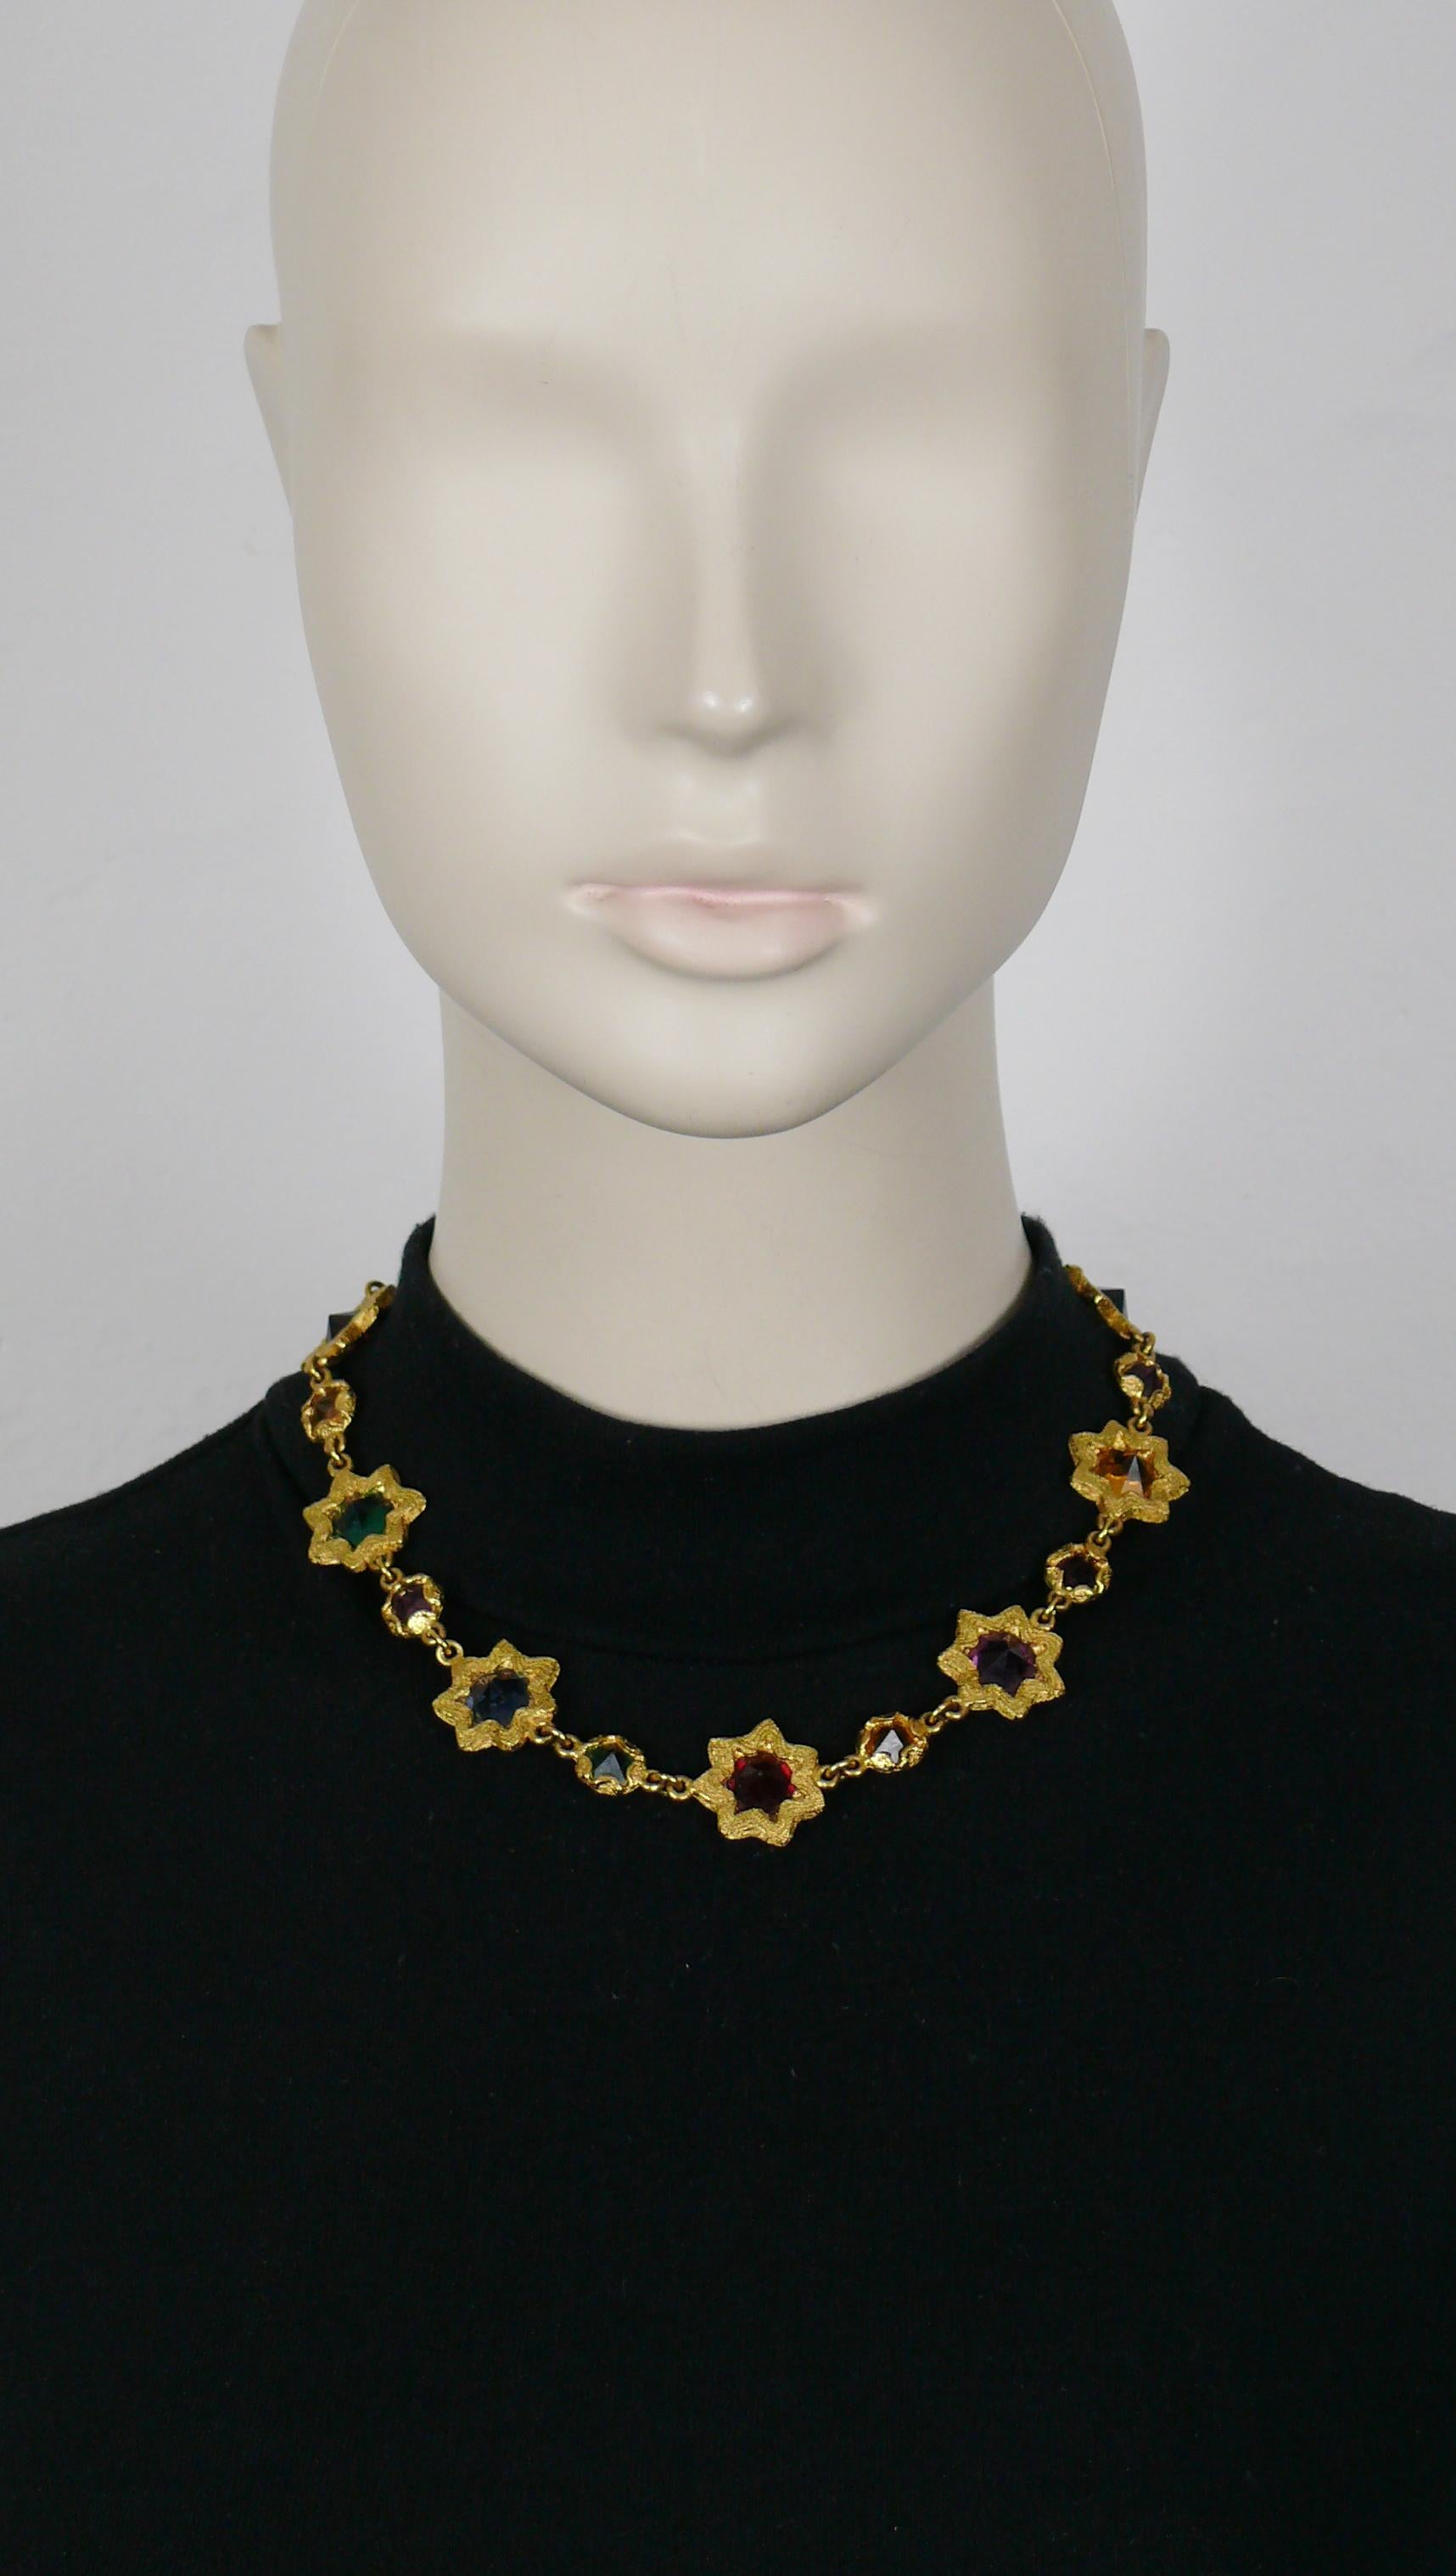 YVES SAINT LAURENT vintage textured gold tone link necklace featuring stars embellished with multicolored pyramidal crystals.

T-bar and toggle closure.

Embossed YVES SAINT LAURENT Made in France.

Indicative measurements : adjustable length from